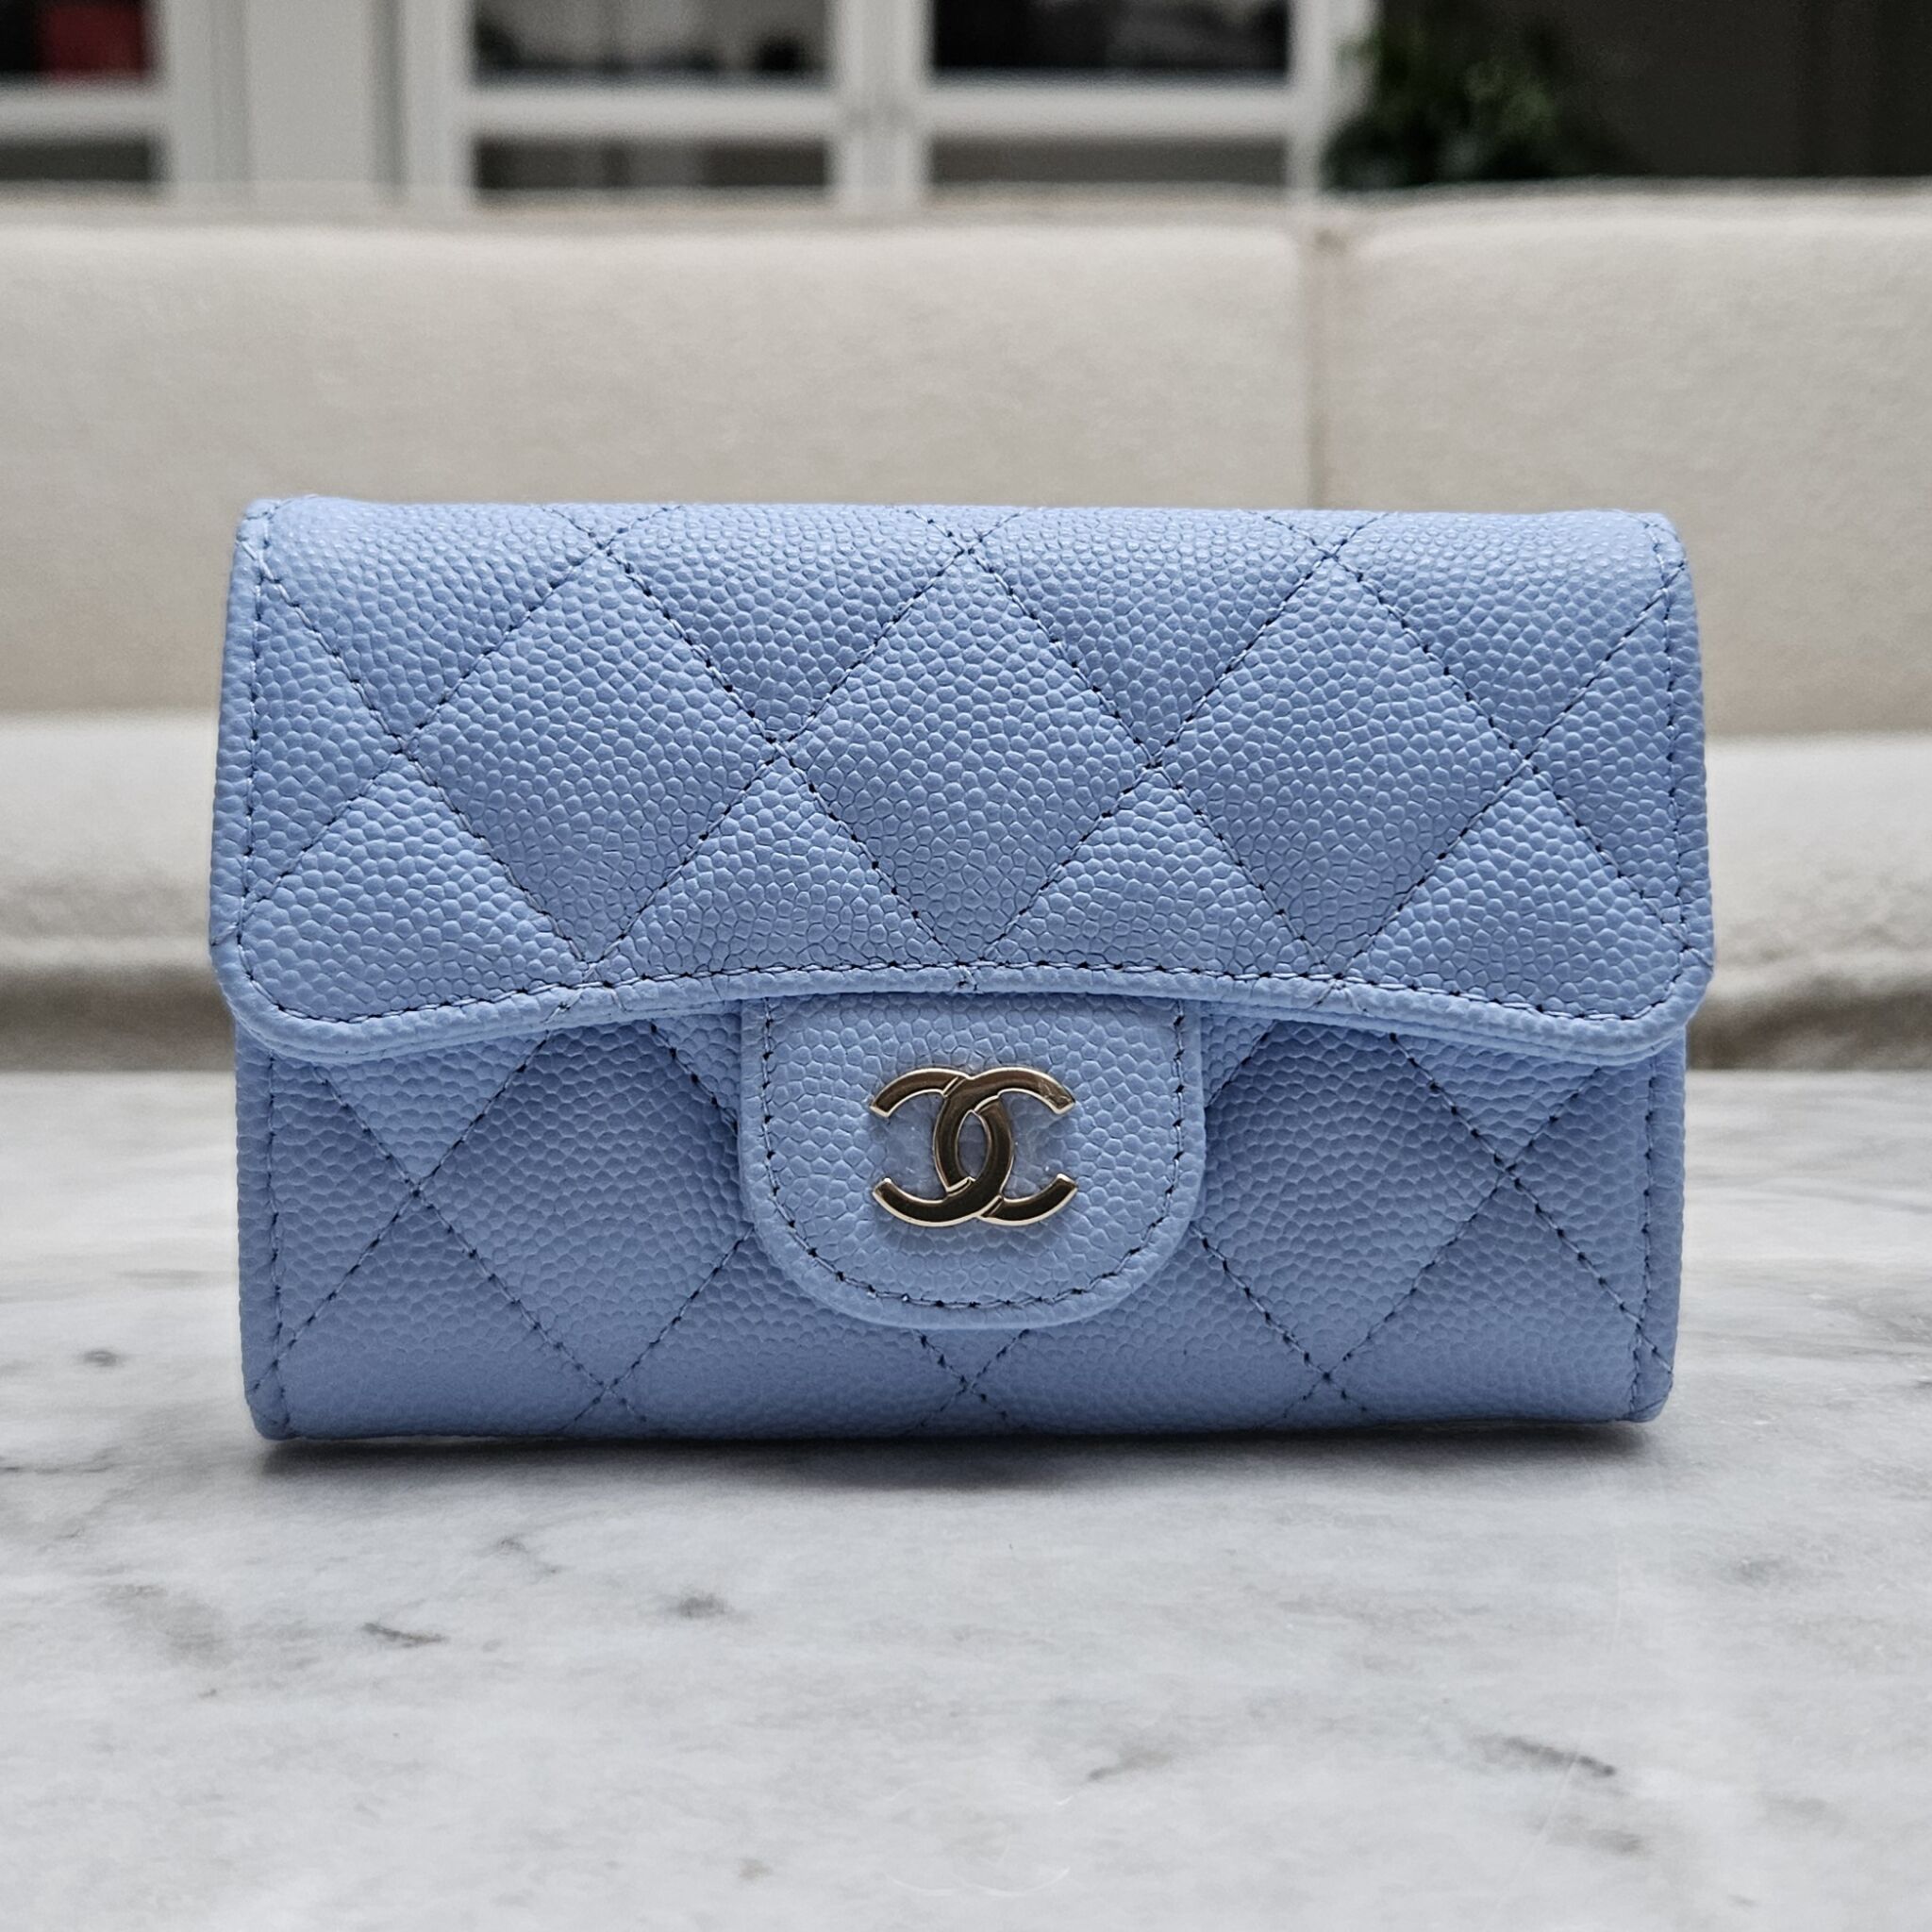 Chanel Powder Blue Mini Square Flap Bag with Gold Hardware Chanel | TLC